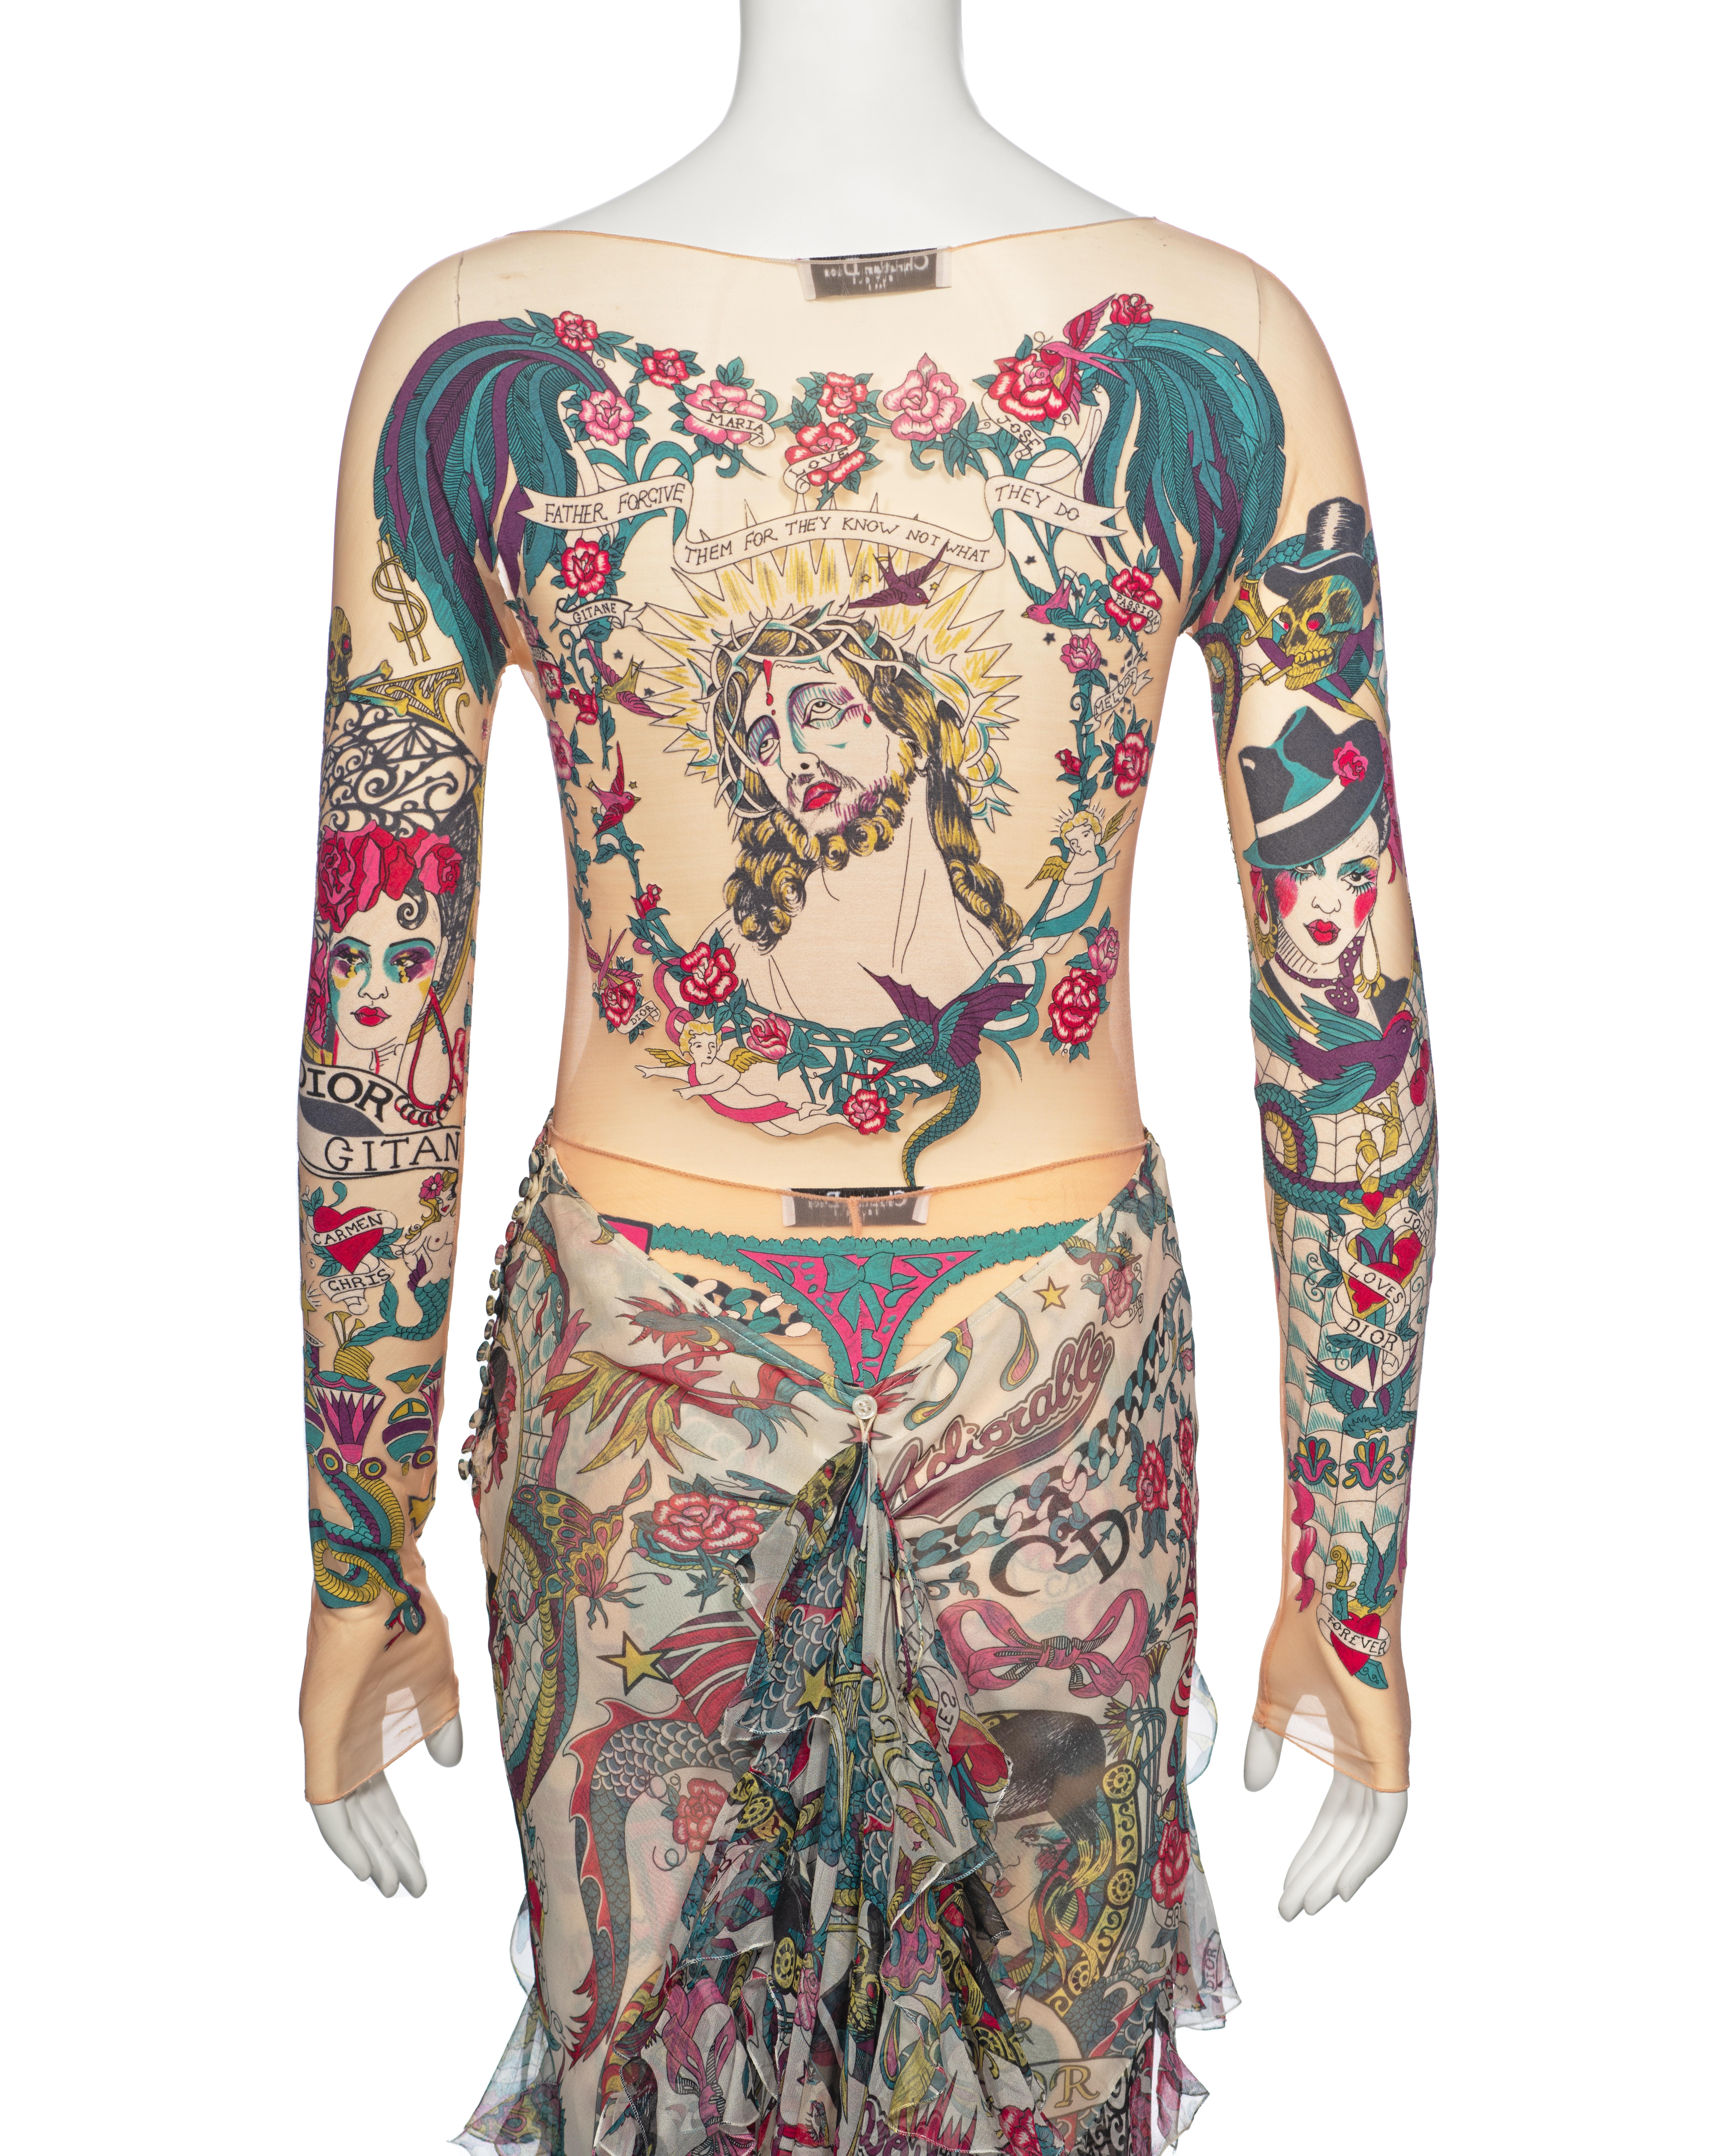 Christian Dior by John Galliano Tattoo Print Body, Leggings and Skirt, ss 2004 For Sale 13